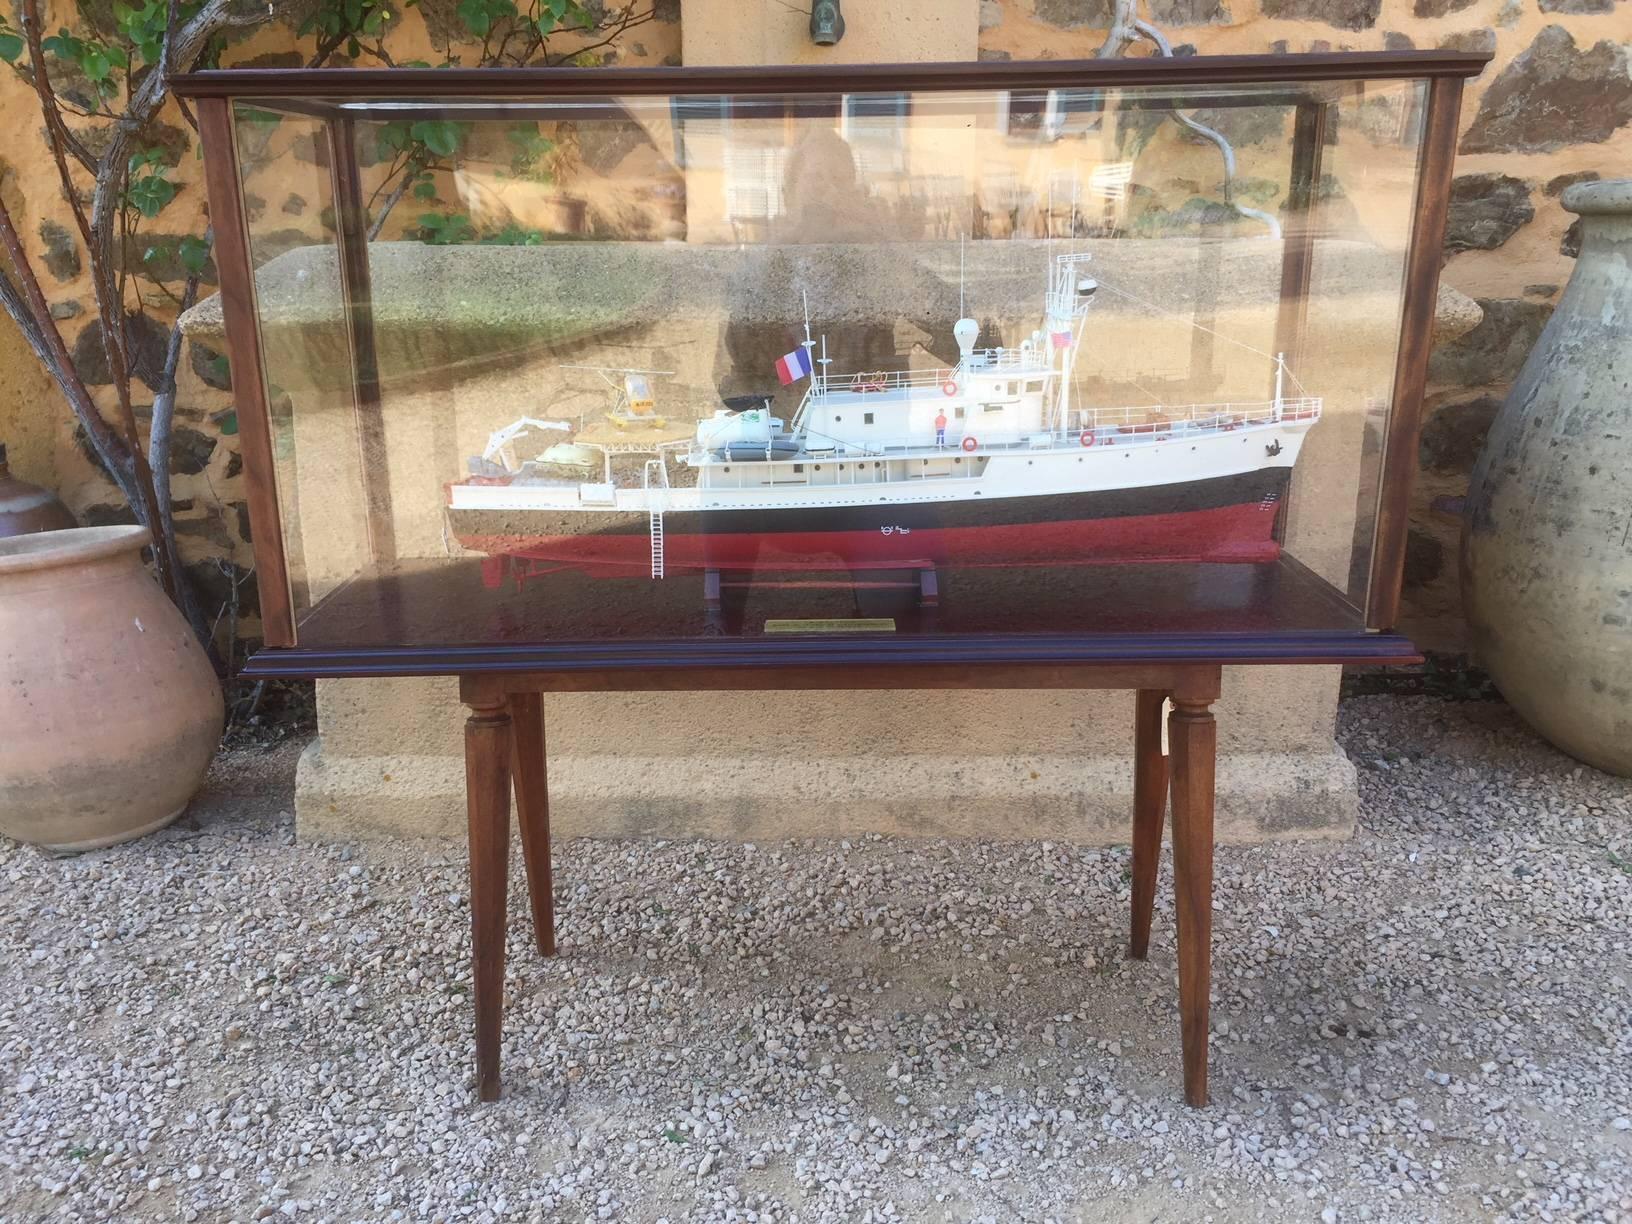 Very nice and rare Captain Cousteau Ocean research ship model under plexiglass from the 1950s.